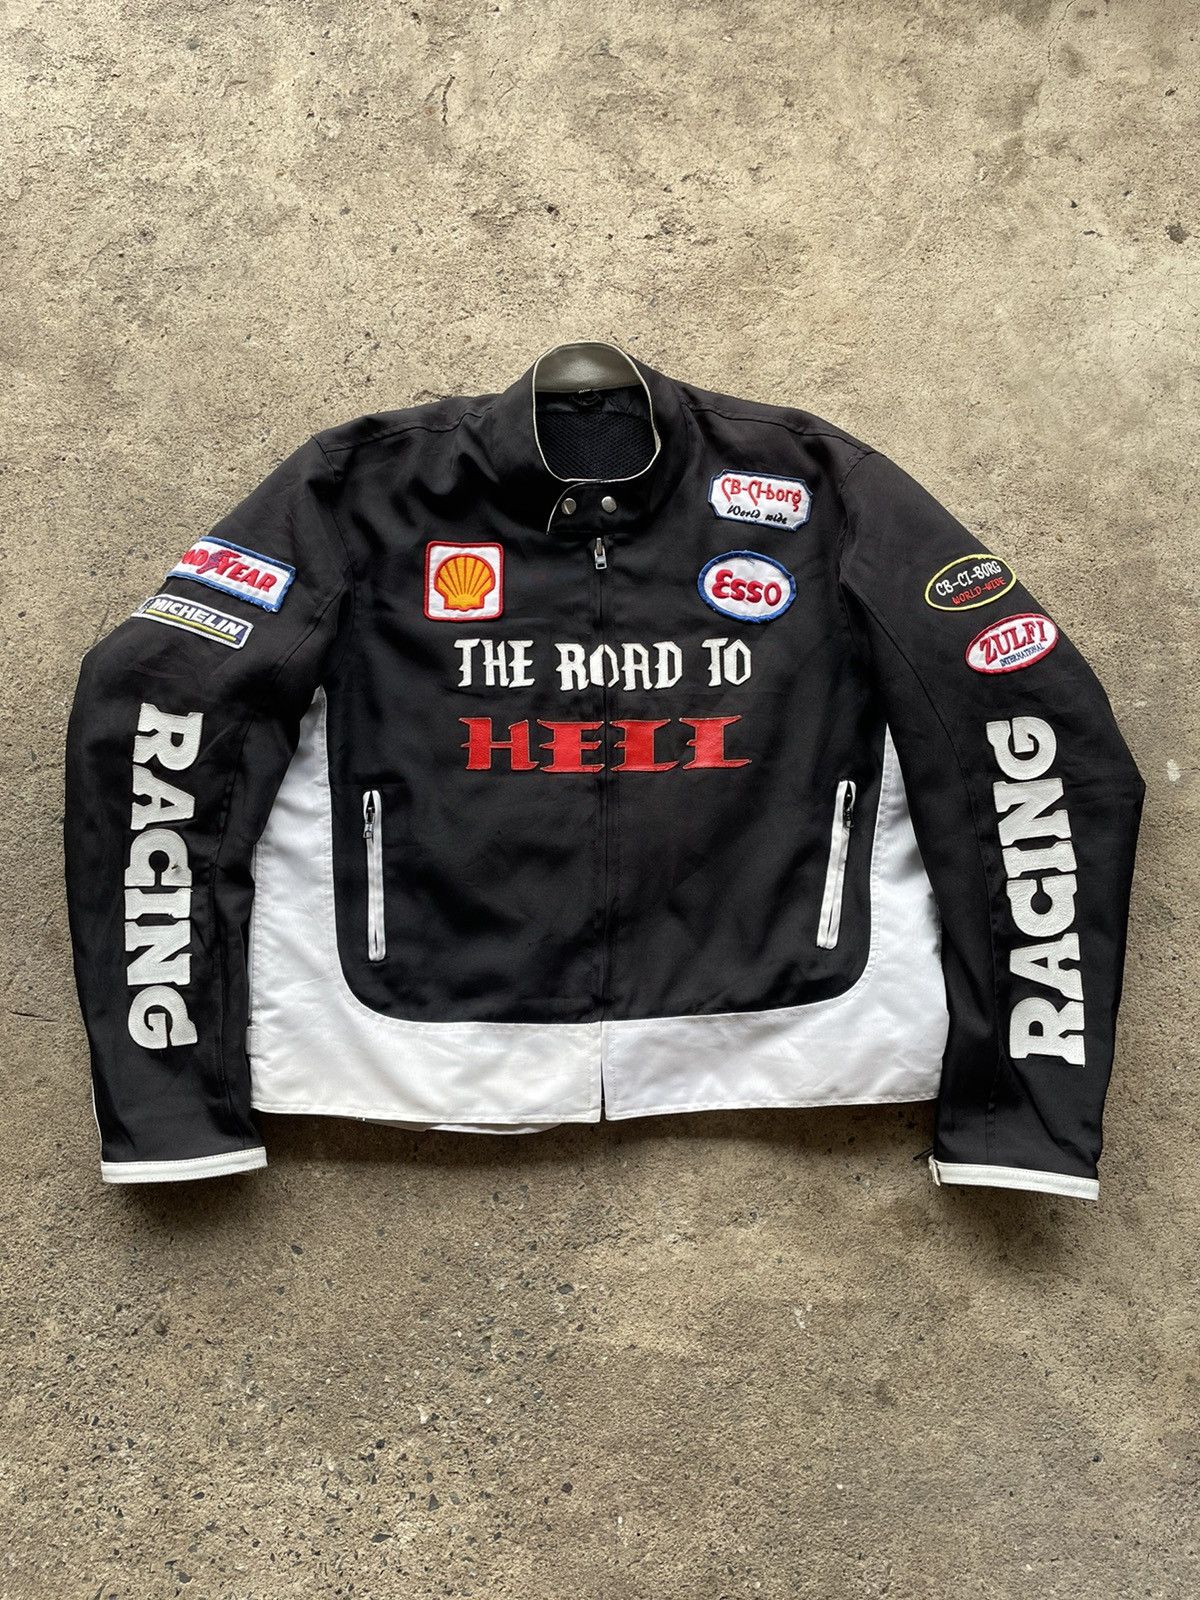 Pre-owned Leather Jacket X Moto The Road To Hell Racing Jacket Hype In Black